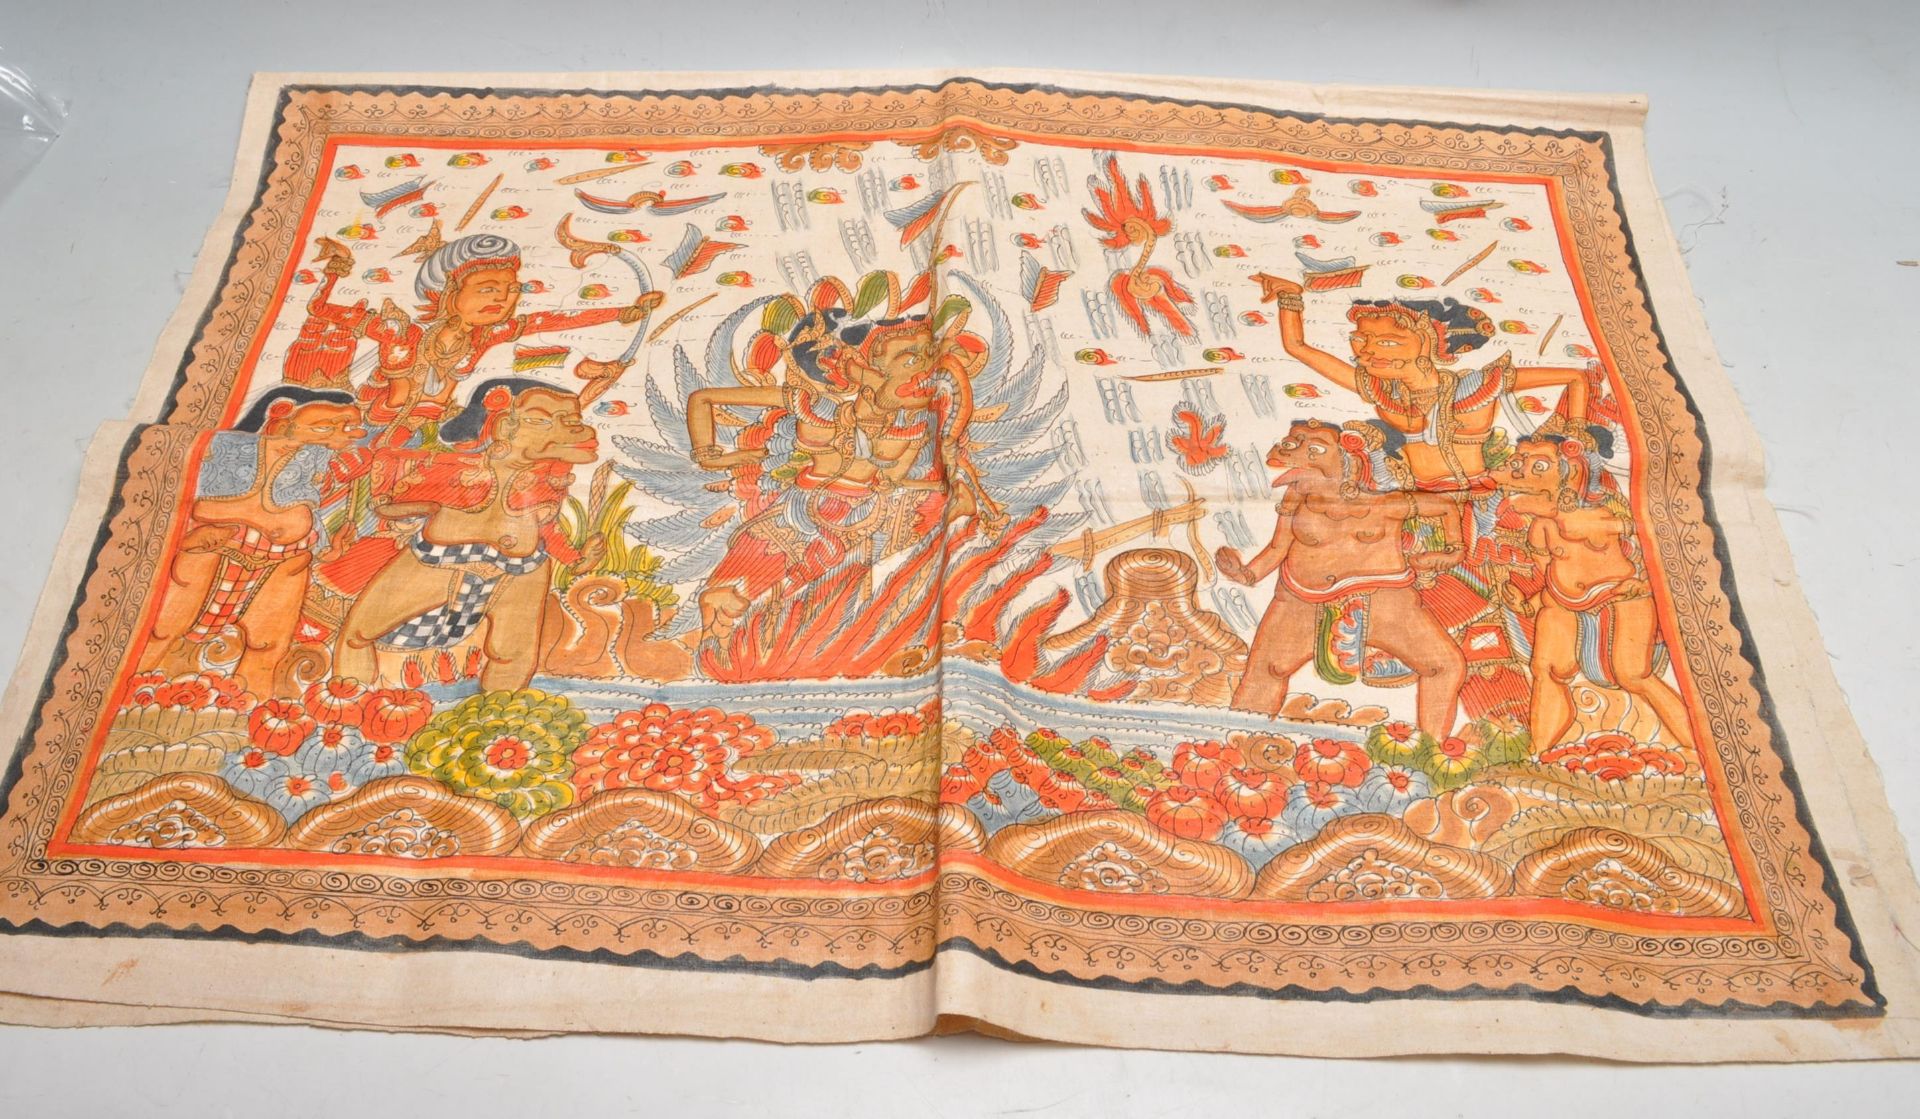 EARLY 20TH CENTURY INDIAN HAND PAINTED WALL HANGING CLOTH